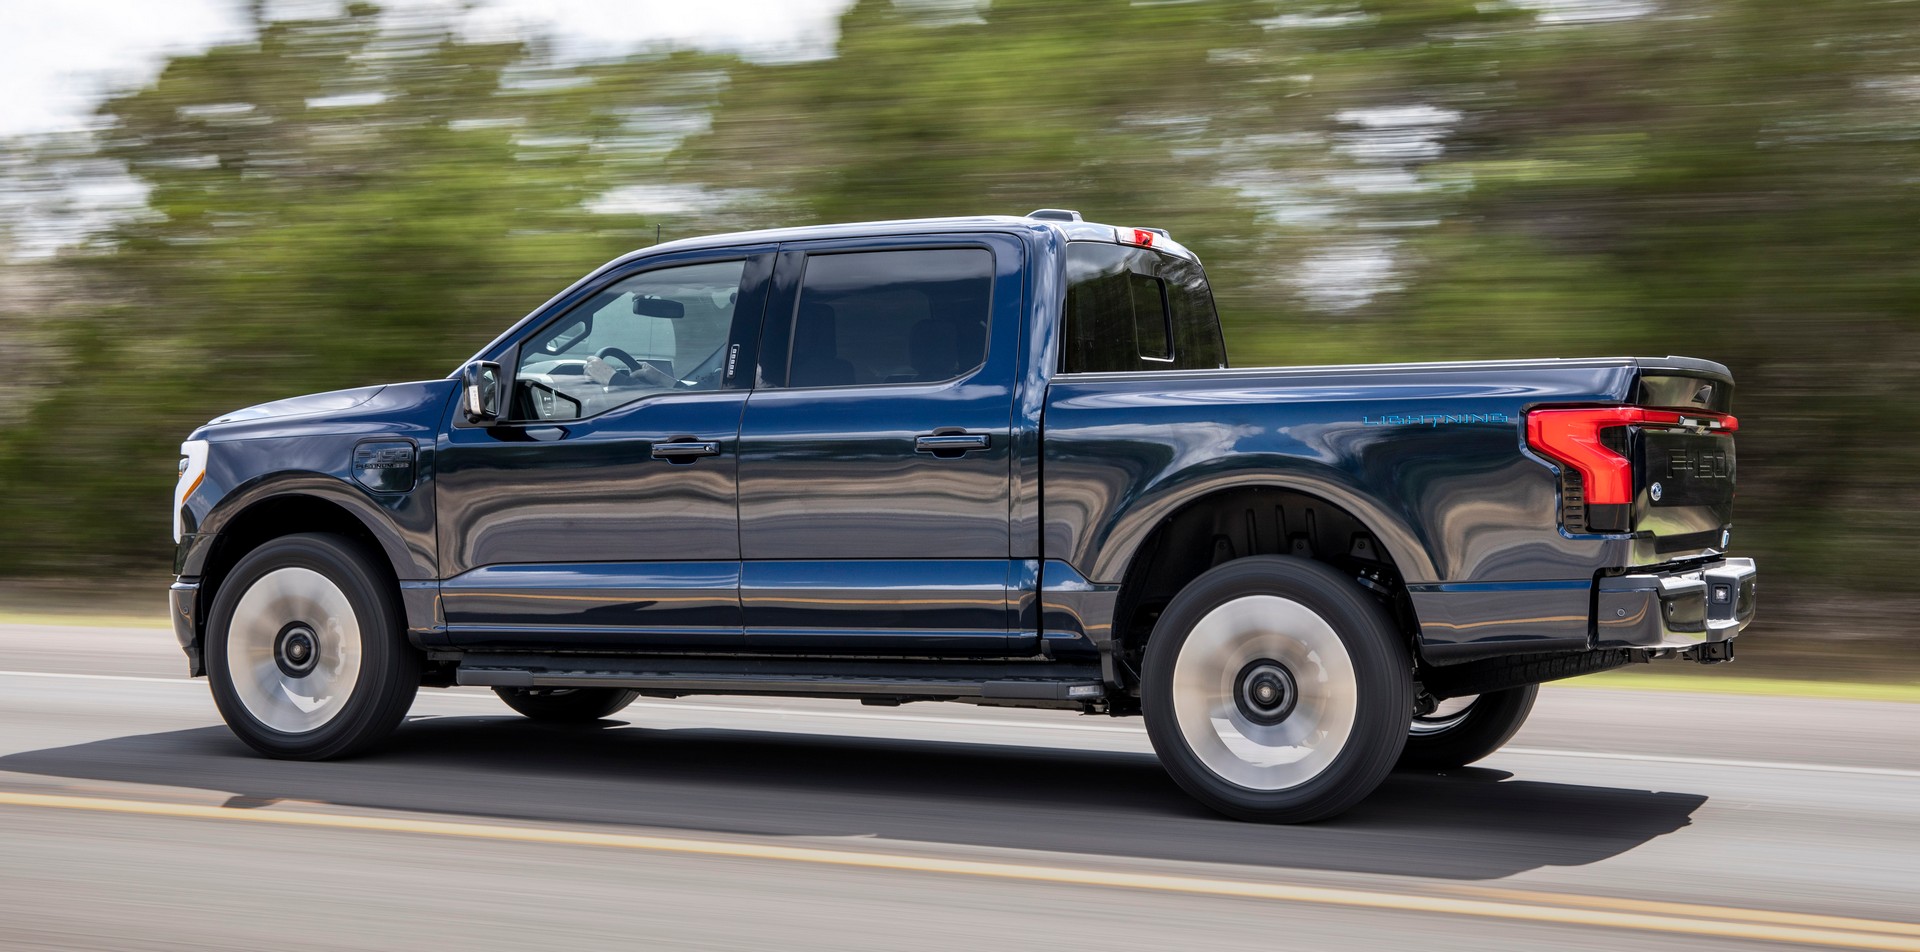 Ford F-150 Lightning Owners Now Get 250 kWh Of Free Charging At Electrify America Stations Auto Recent